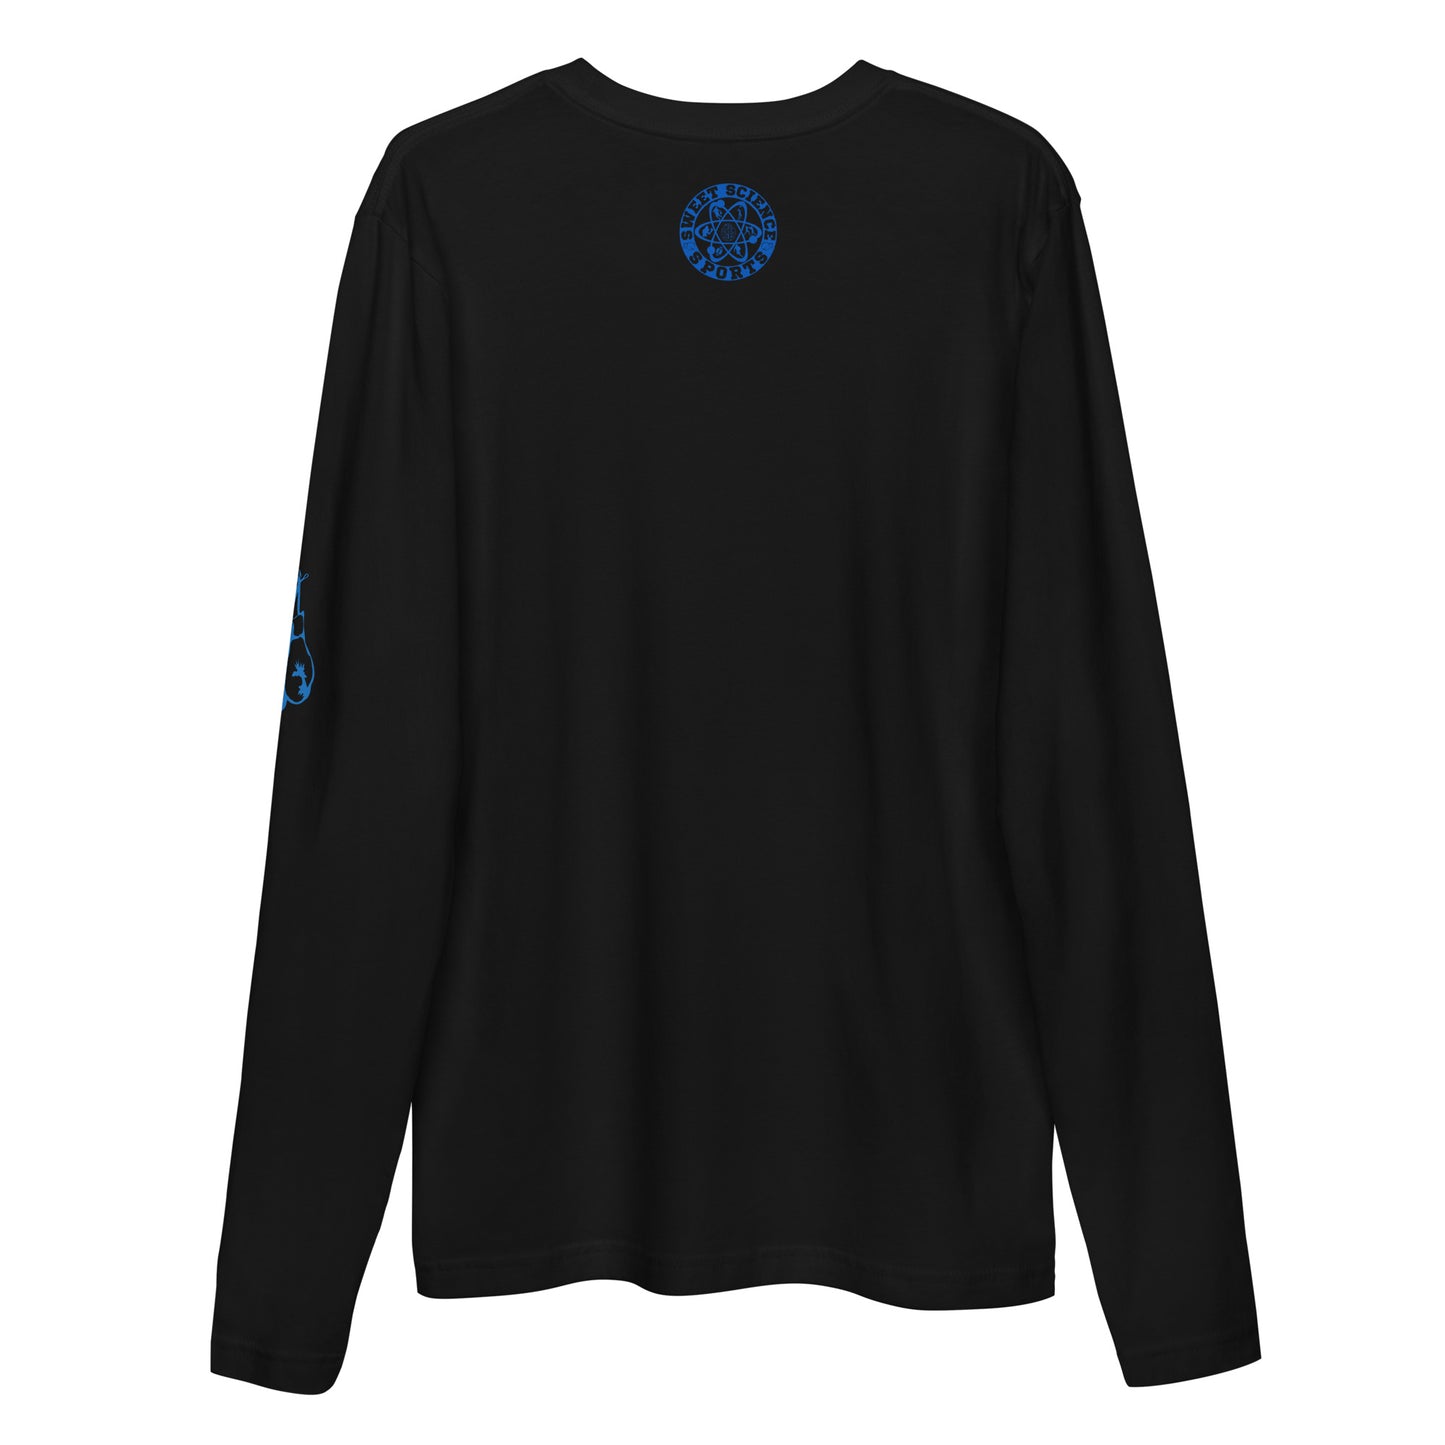 SOUTHPAW/ORTHODOX Long Sleeve Fitted Crew